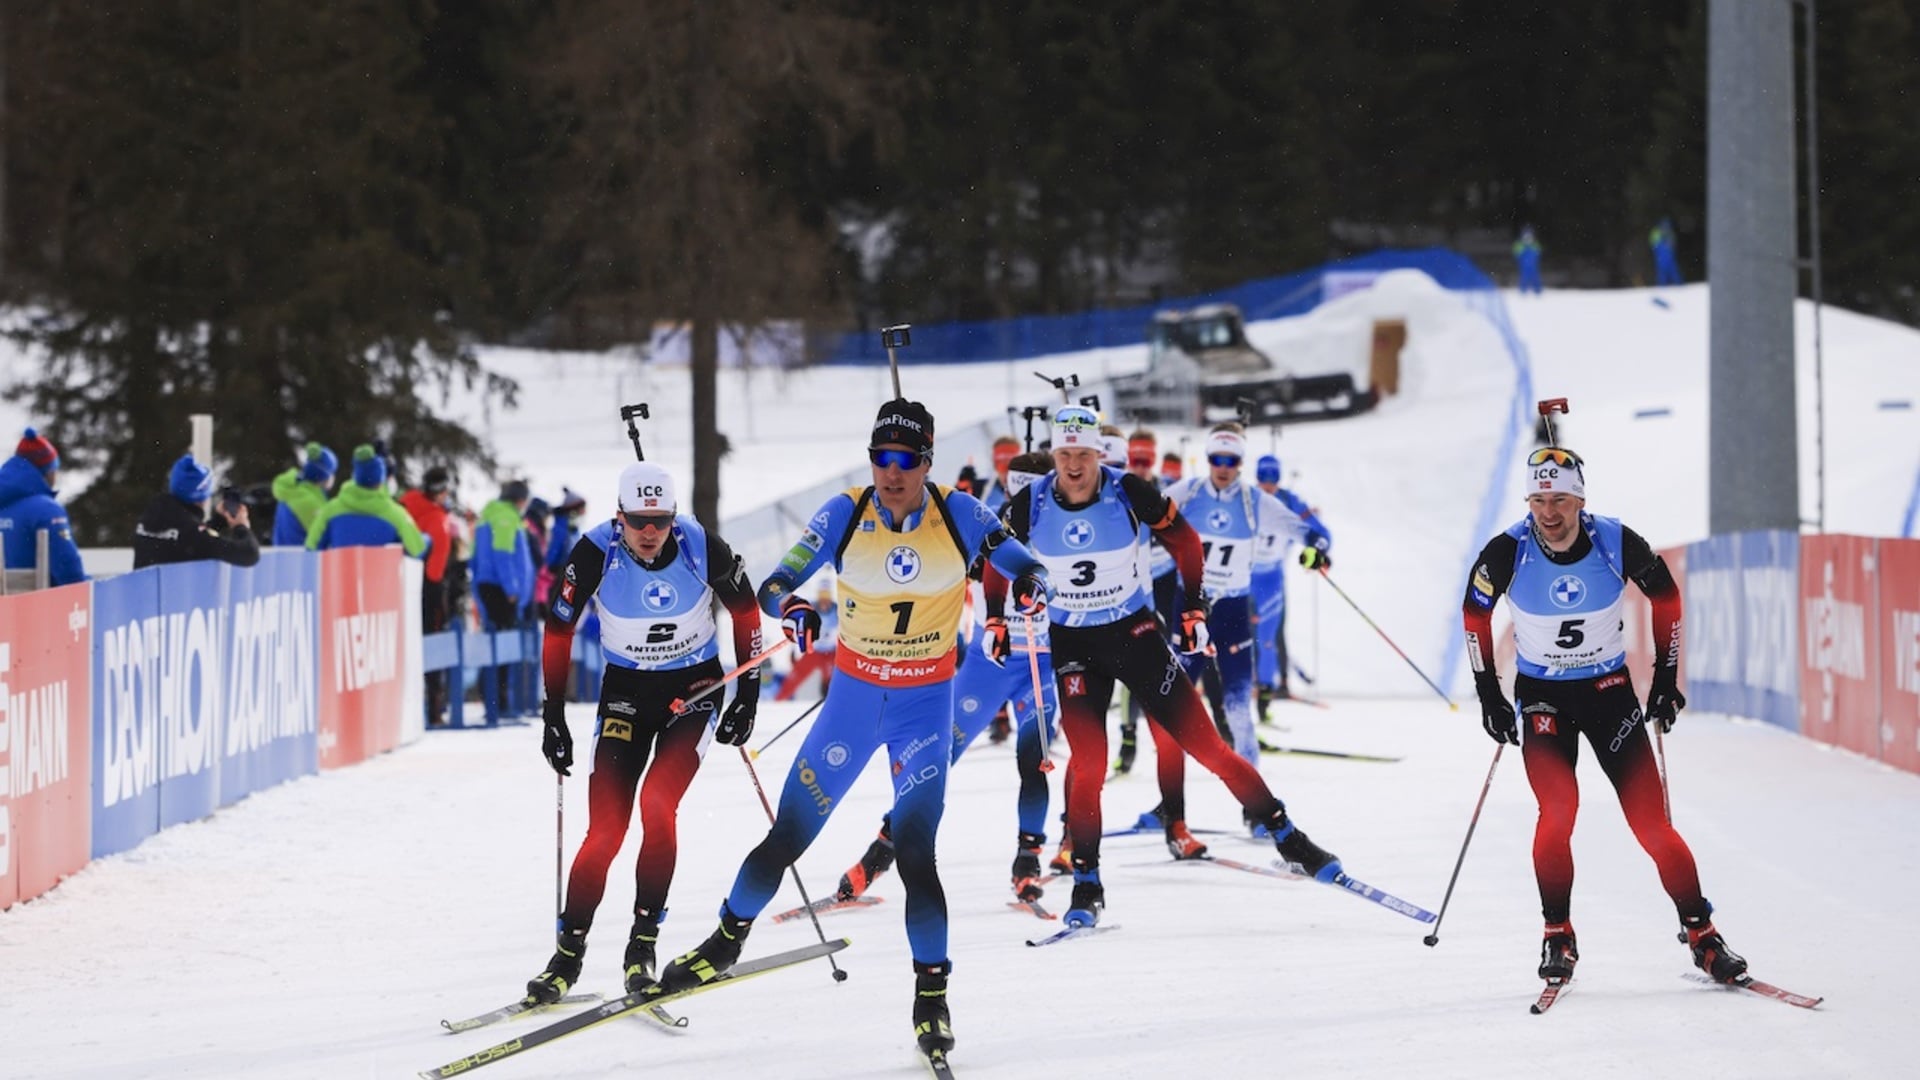 22.01.2022 - The crowning conclusion in Antholz